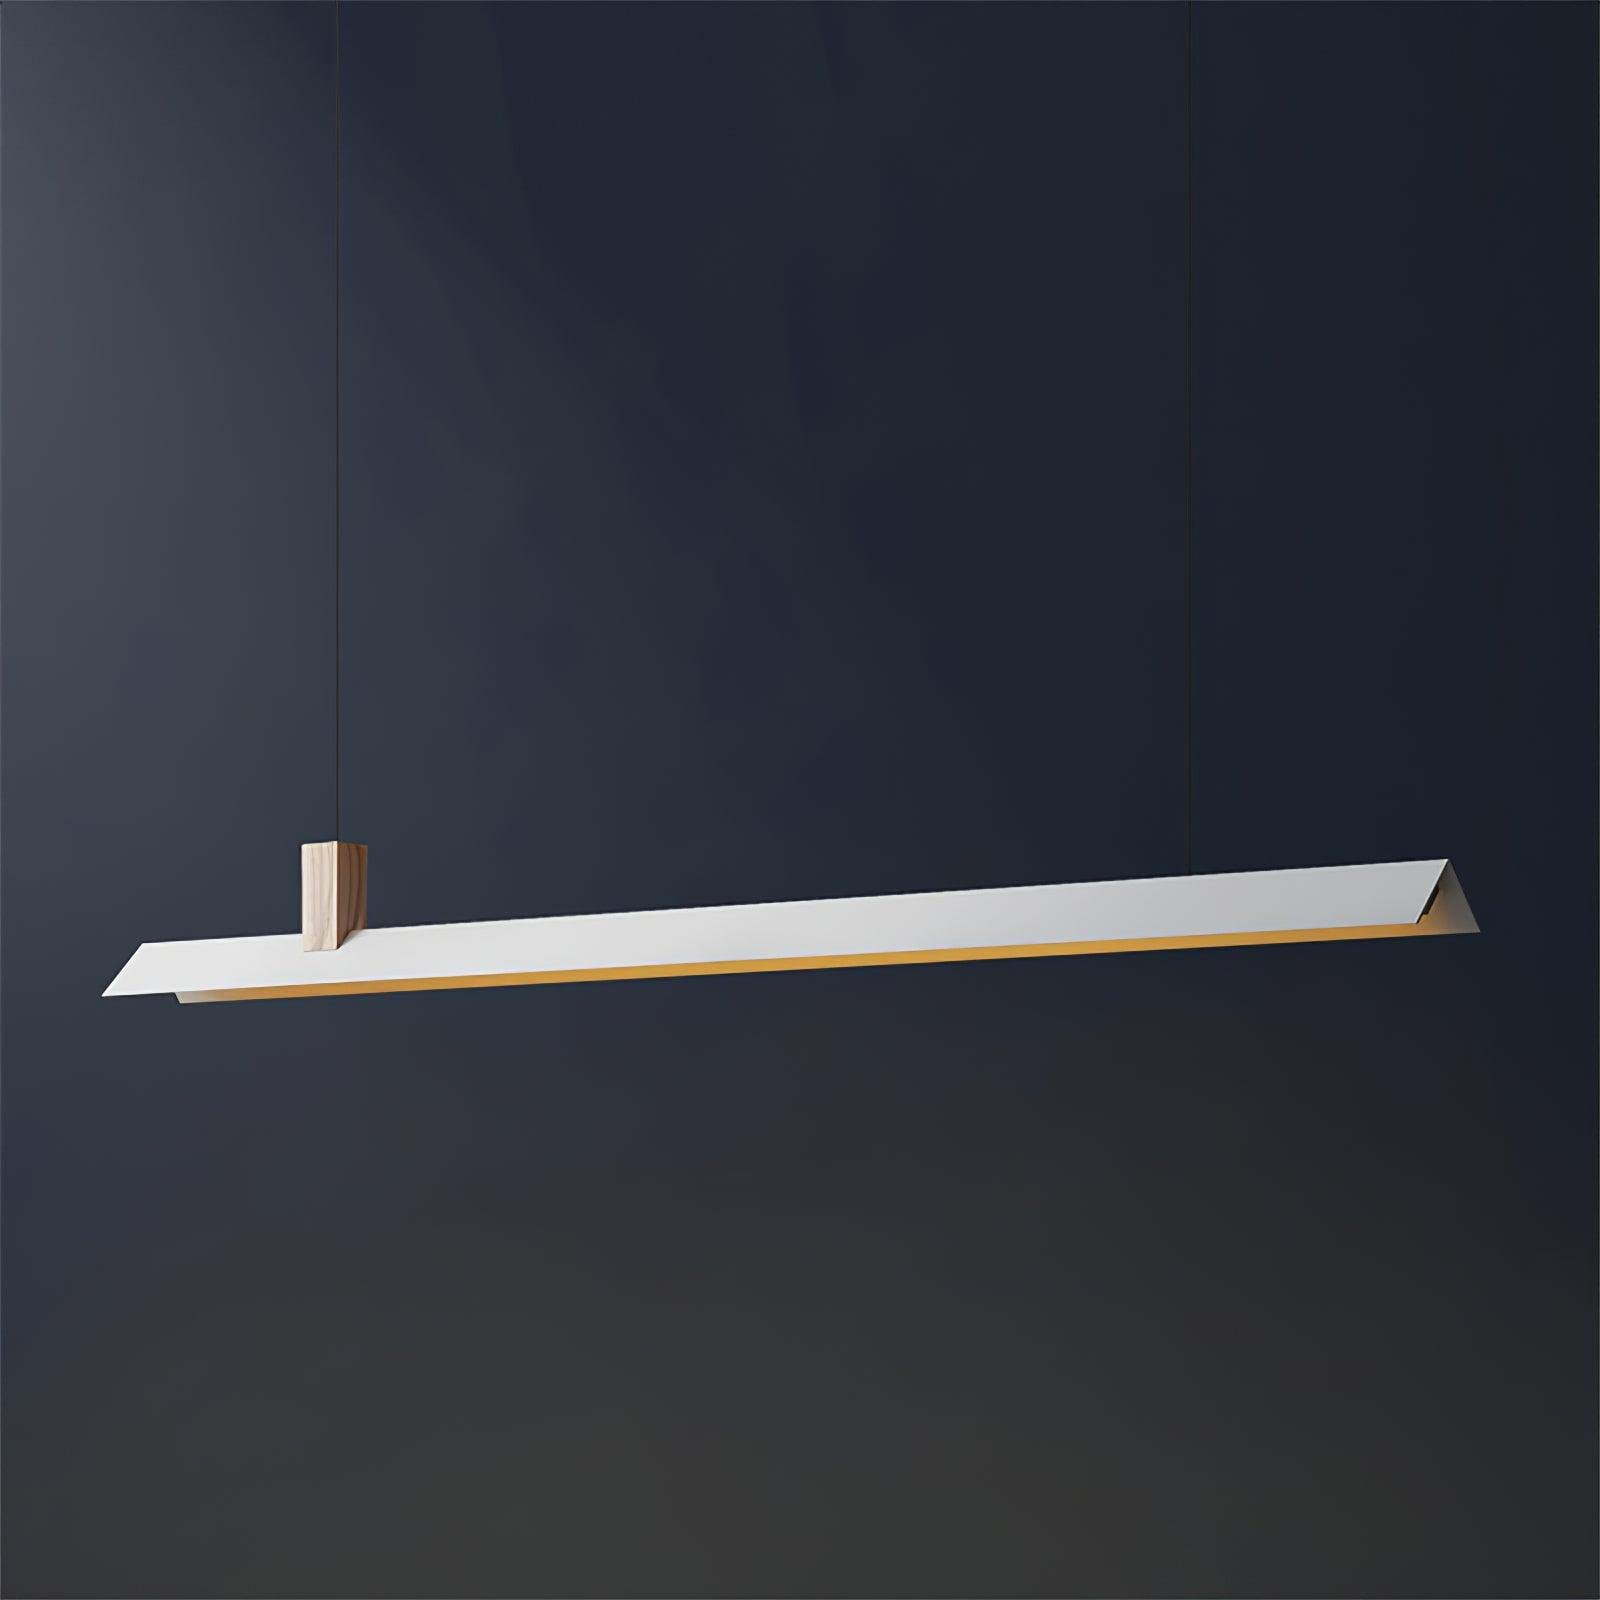 Cool Light Emitting White Axis T Pendant Light with Dimensions of 130cm in Length, 11cm in Width, and 150cm in Height, or 51.2" x 4.3" x 59"